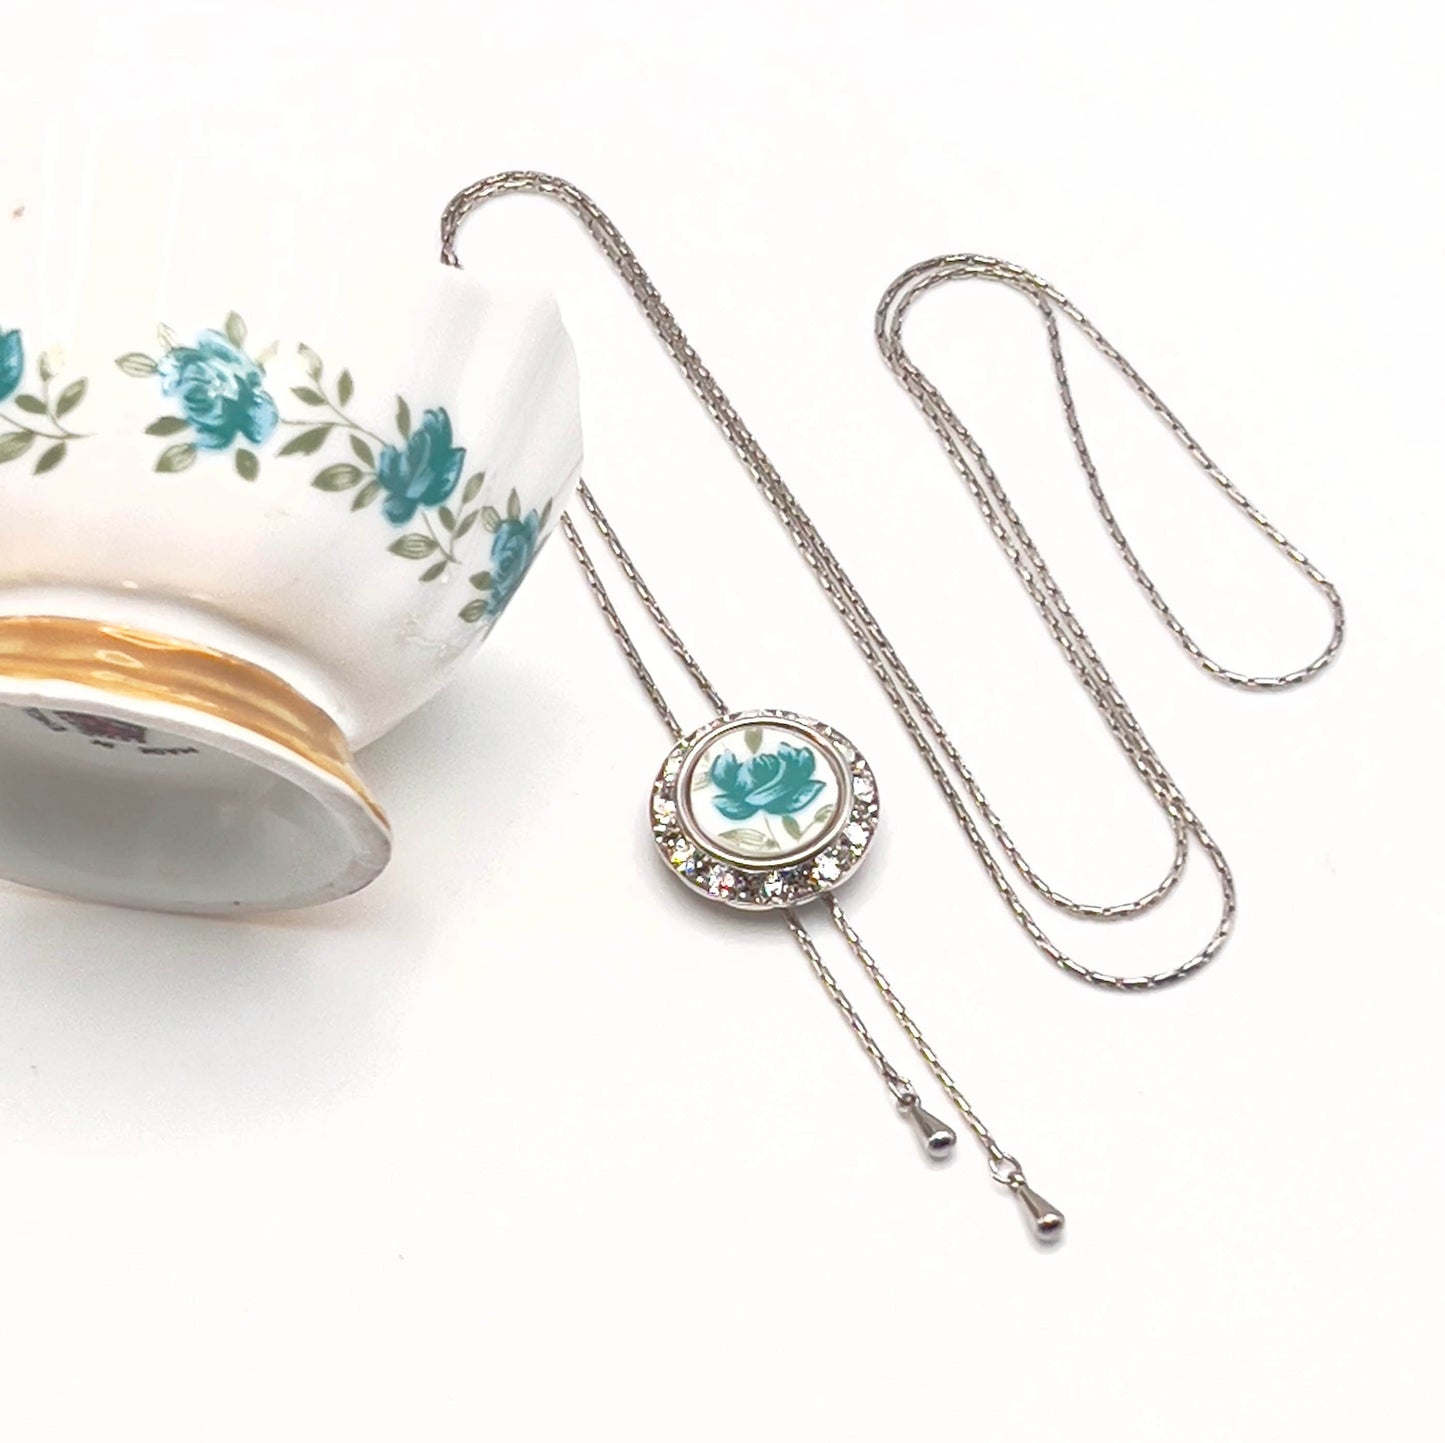 Blue Rose Lariat Necklace, Vintage Broken China Jewelry, Adjustable Bolo Tie, Crystal Necklace, Long Elegant Necklace, Gifts for Her